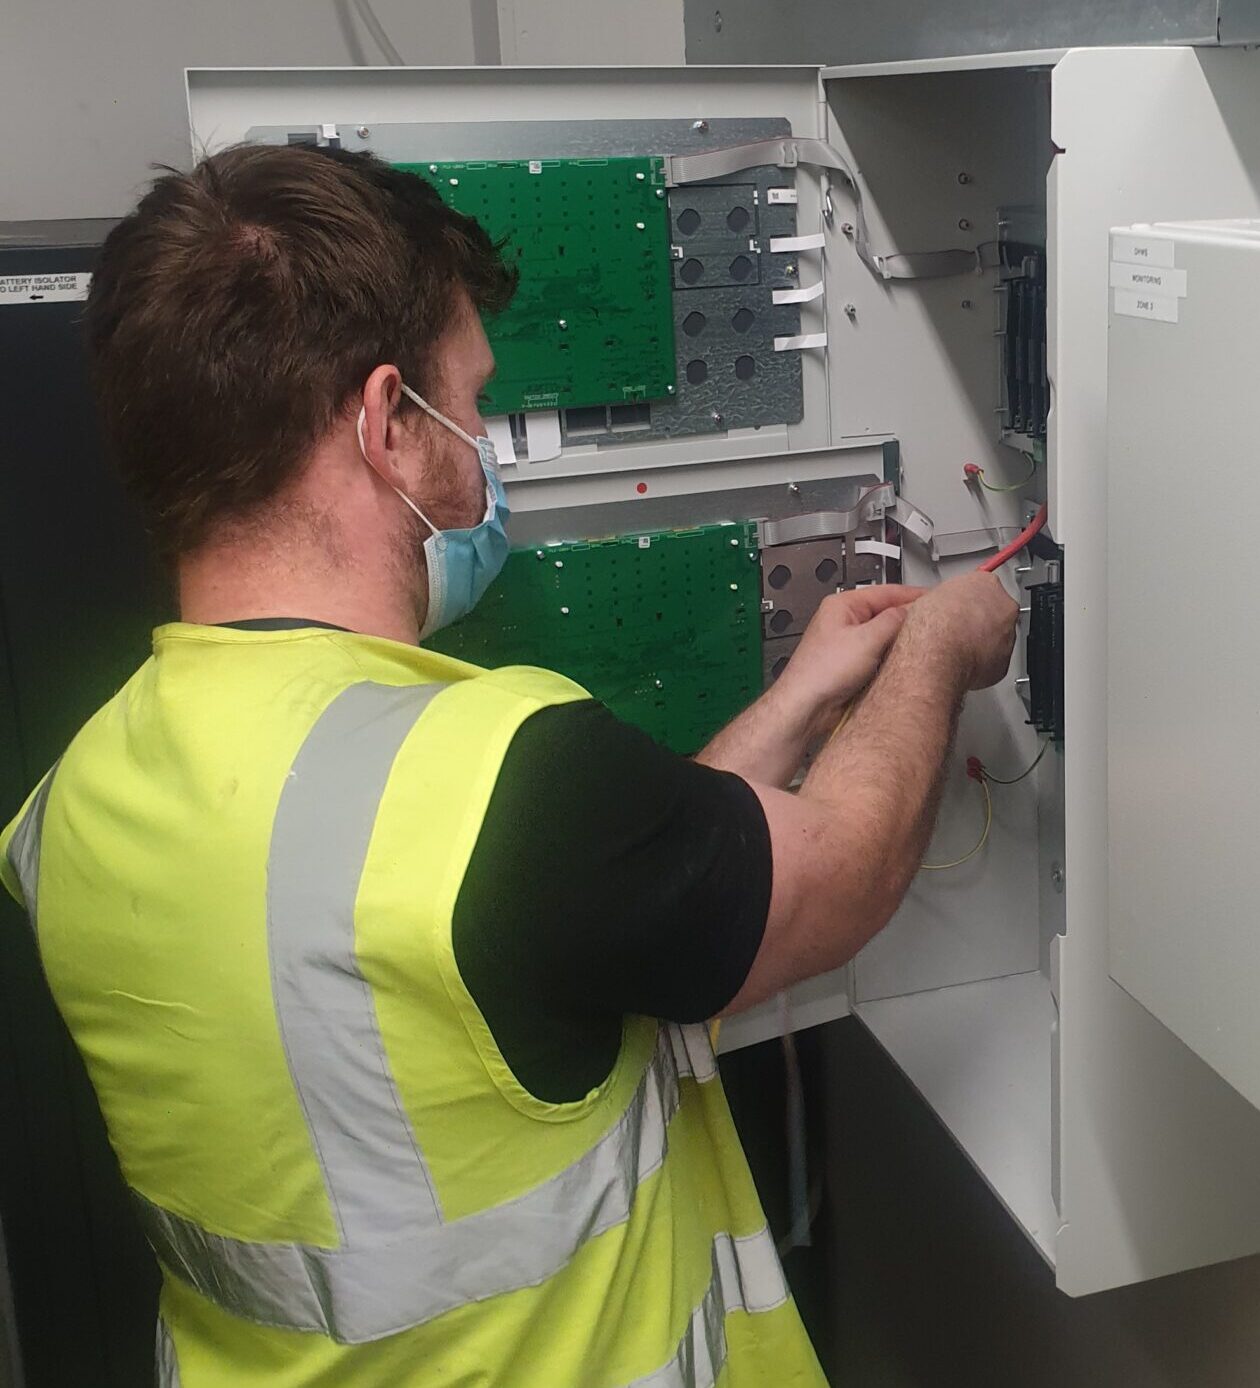 Engineer carrying out a repair on a Alarm System